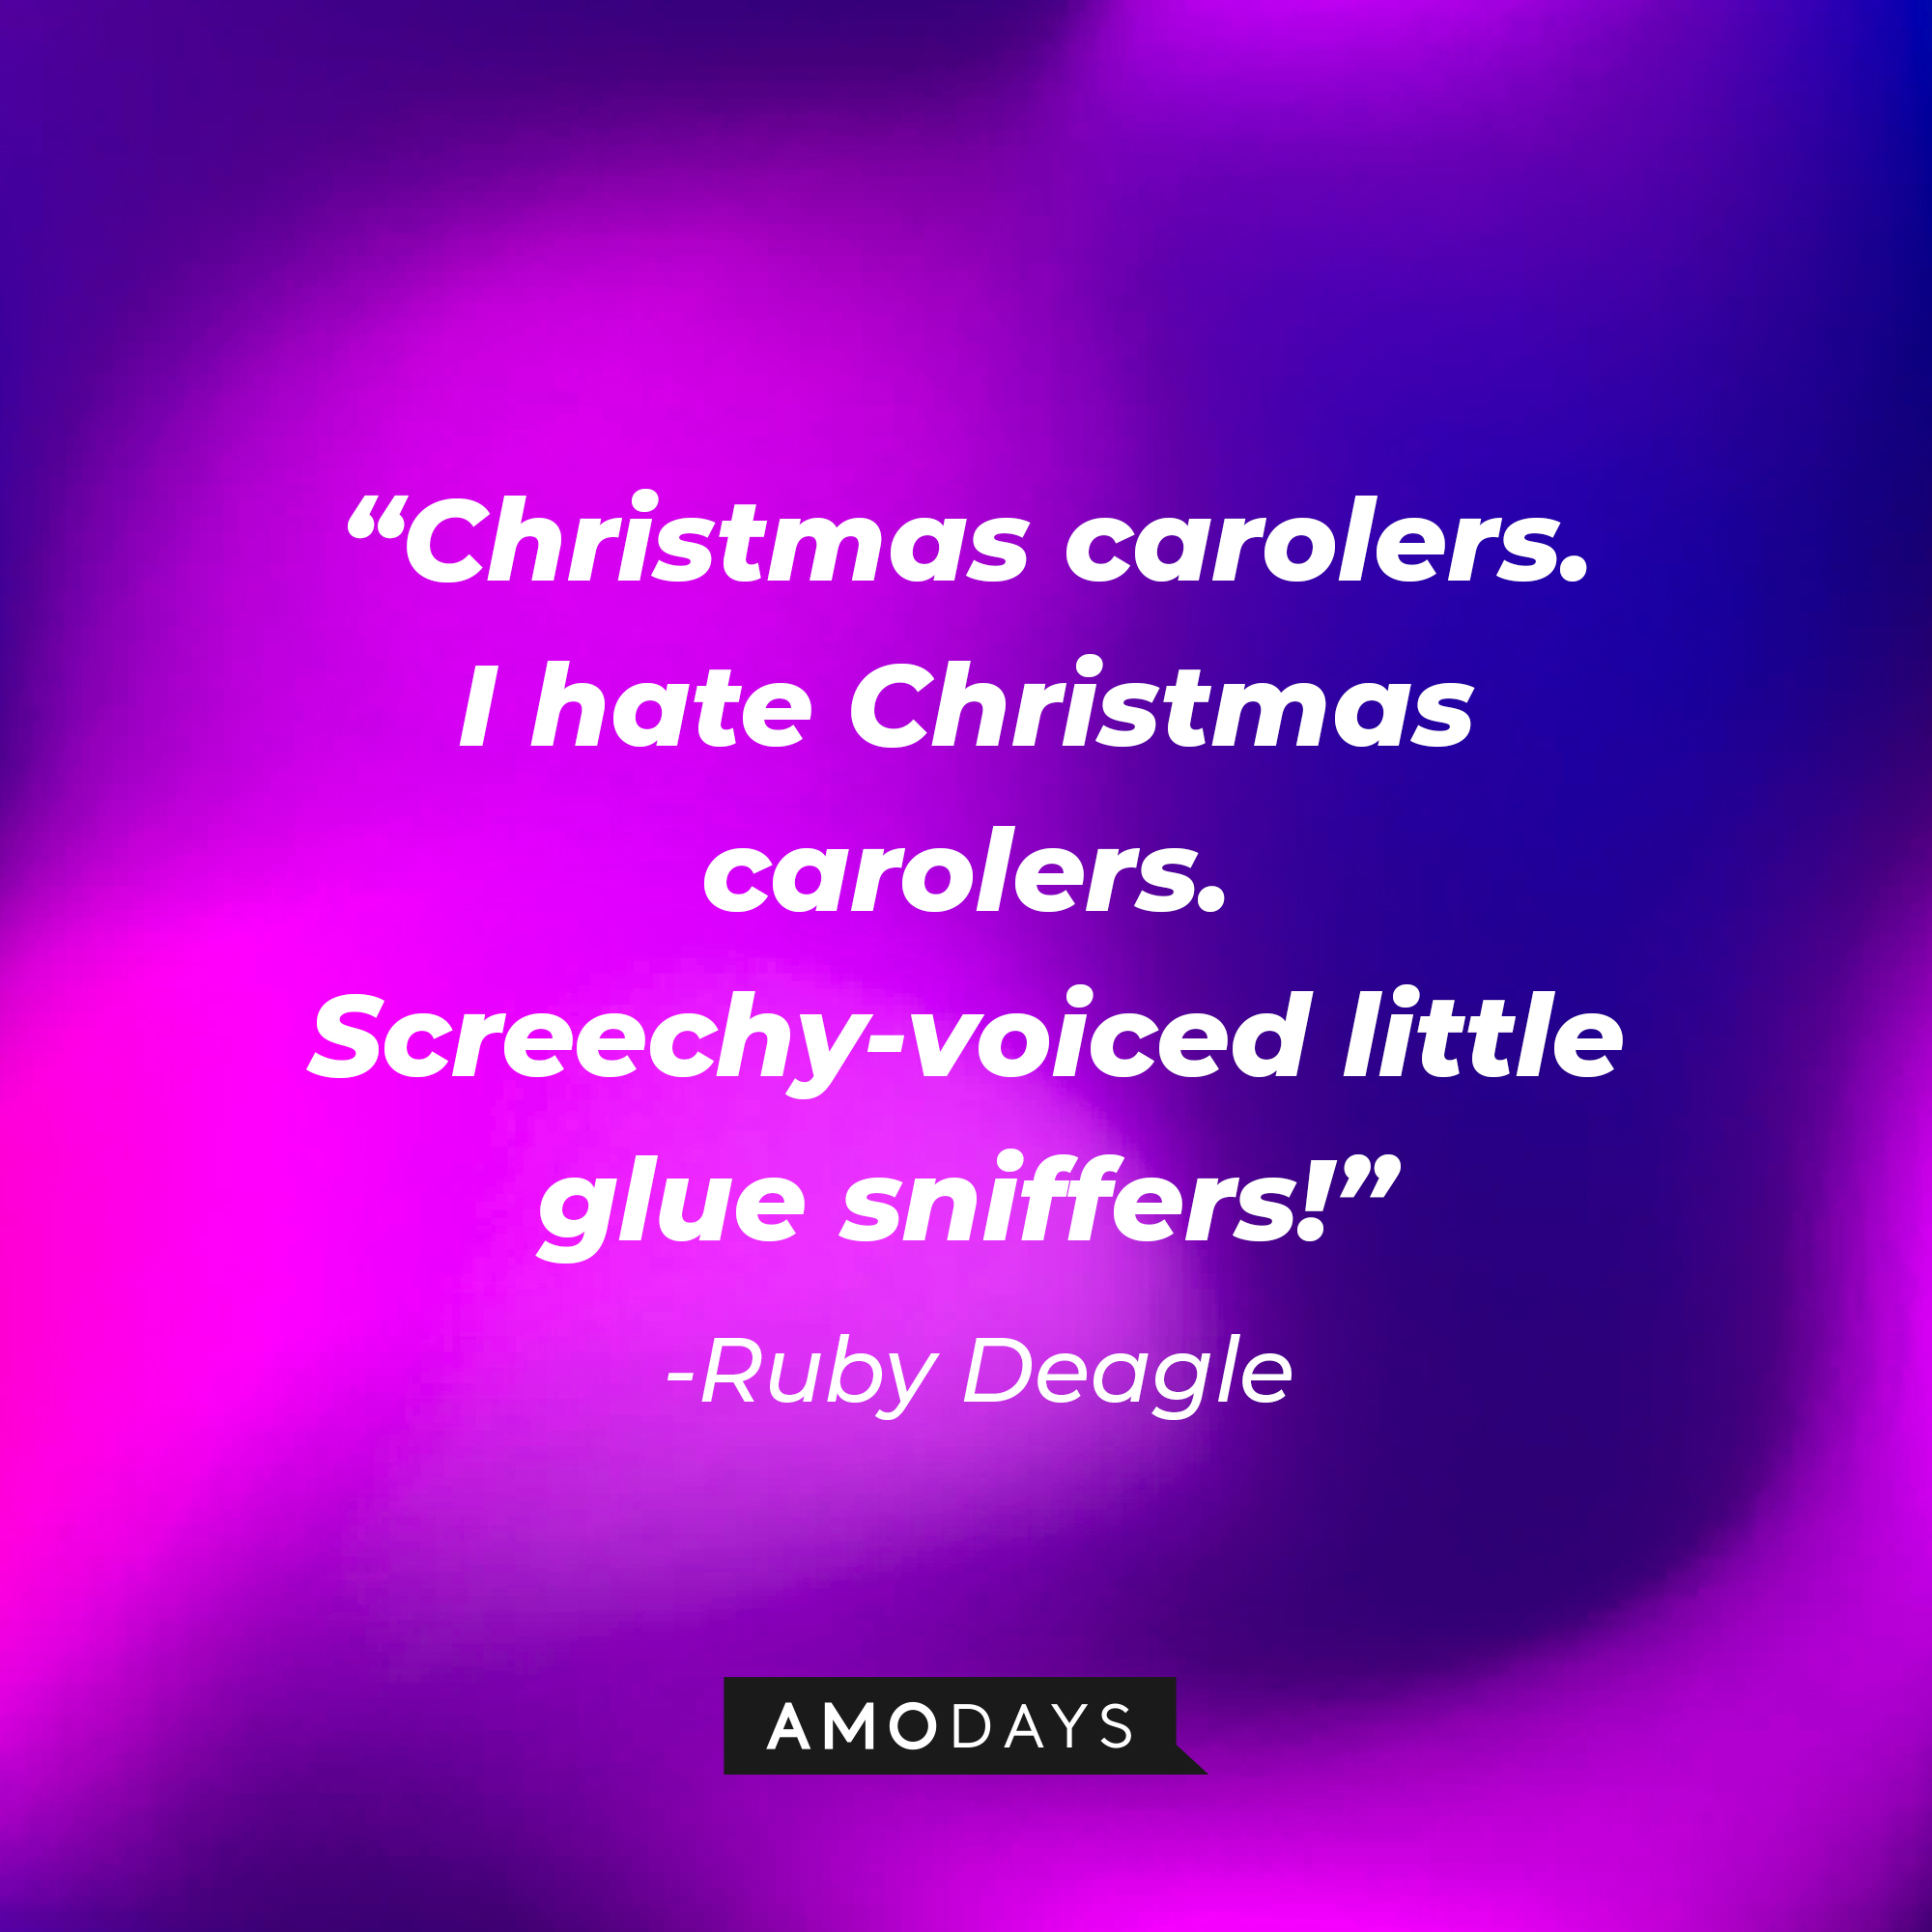 Ruby Deagle's quote: "Christmas carolers. I hate Christmas carolers. Screechy-voiced little glue sniffers!" | Source: AmoDays